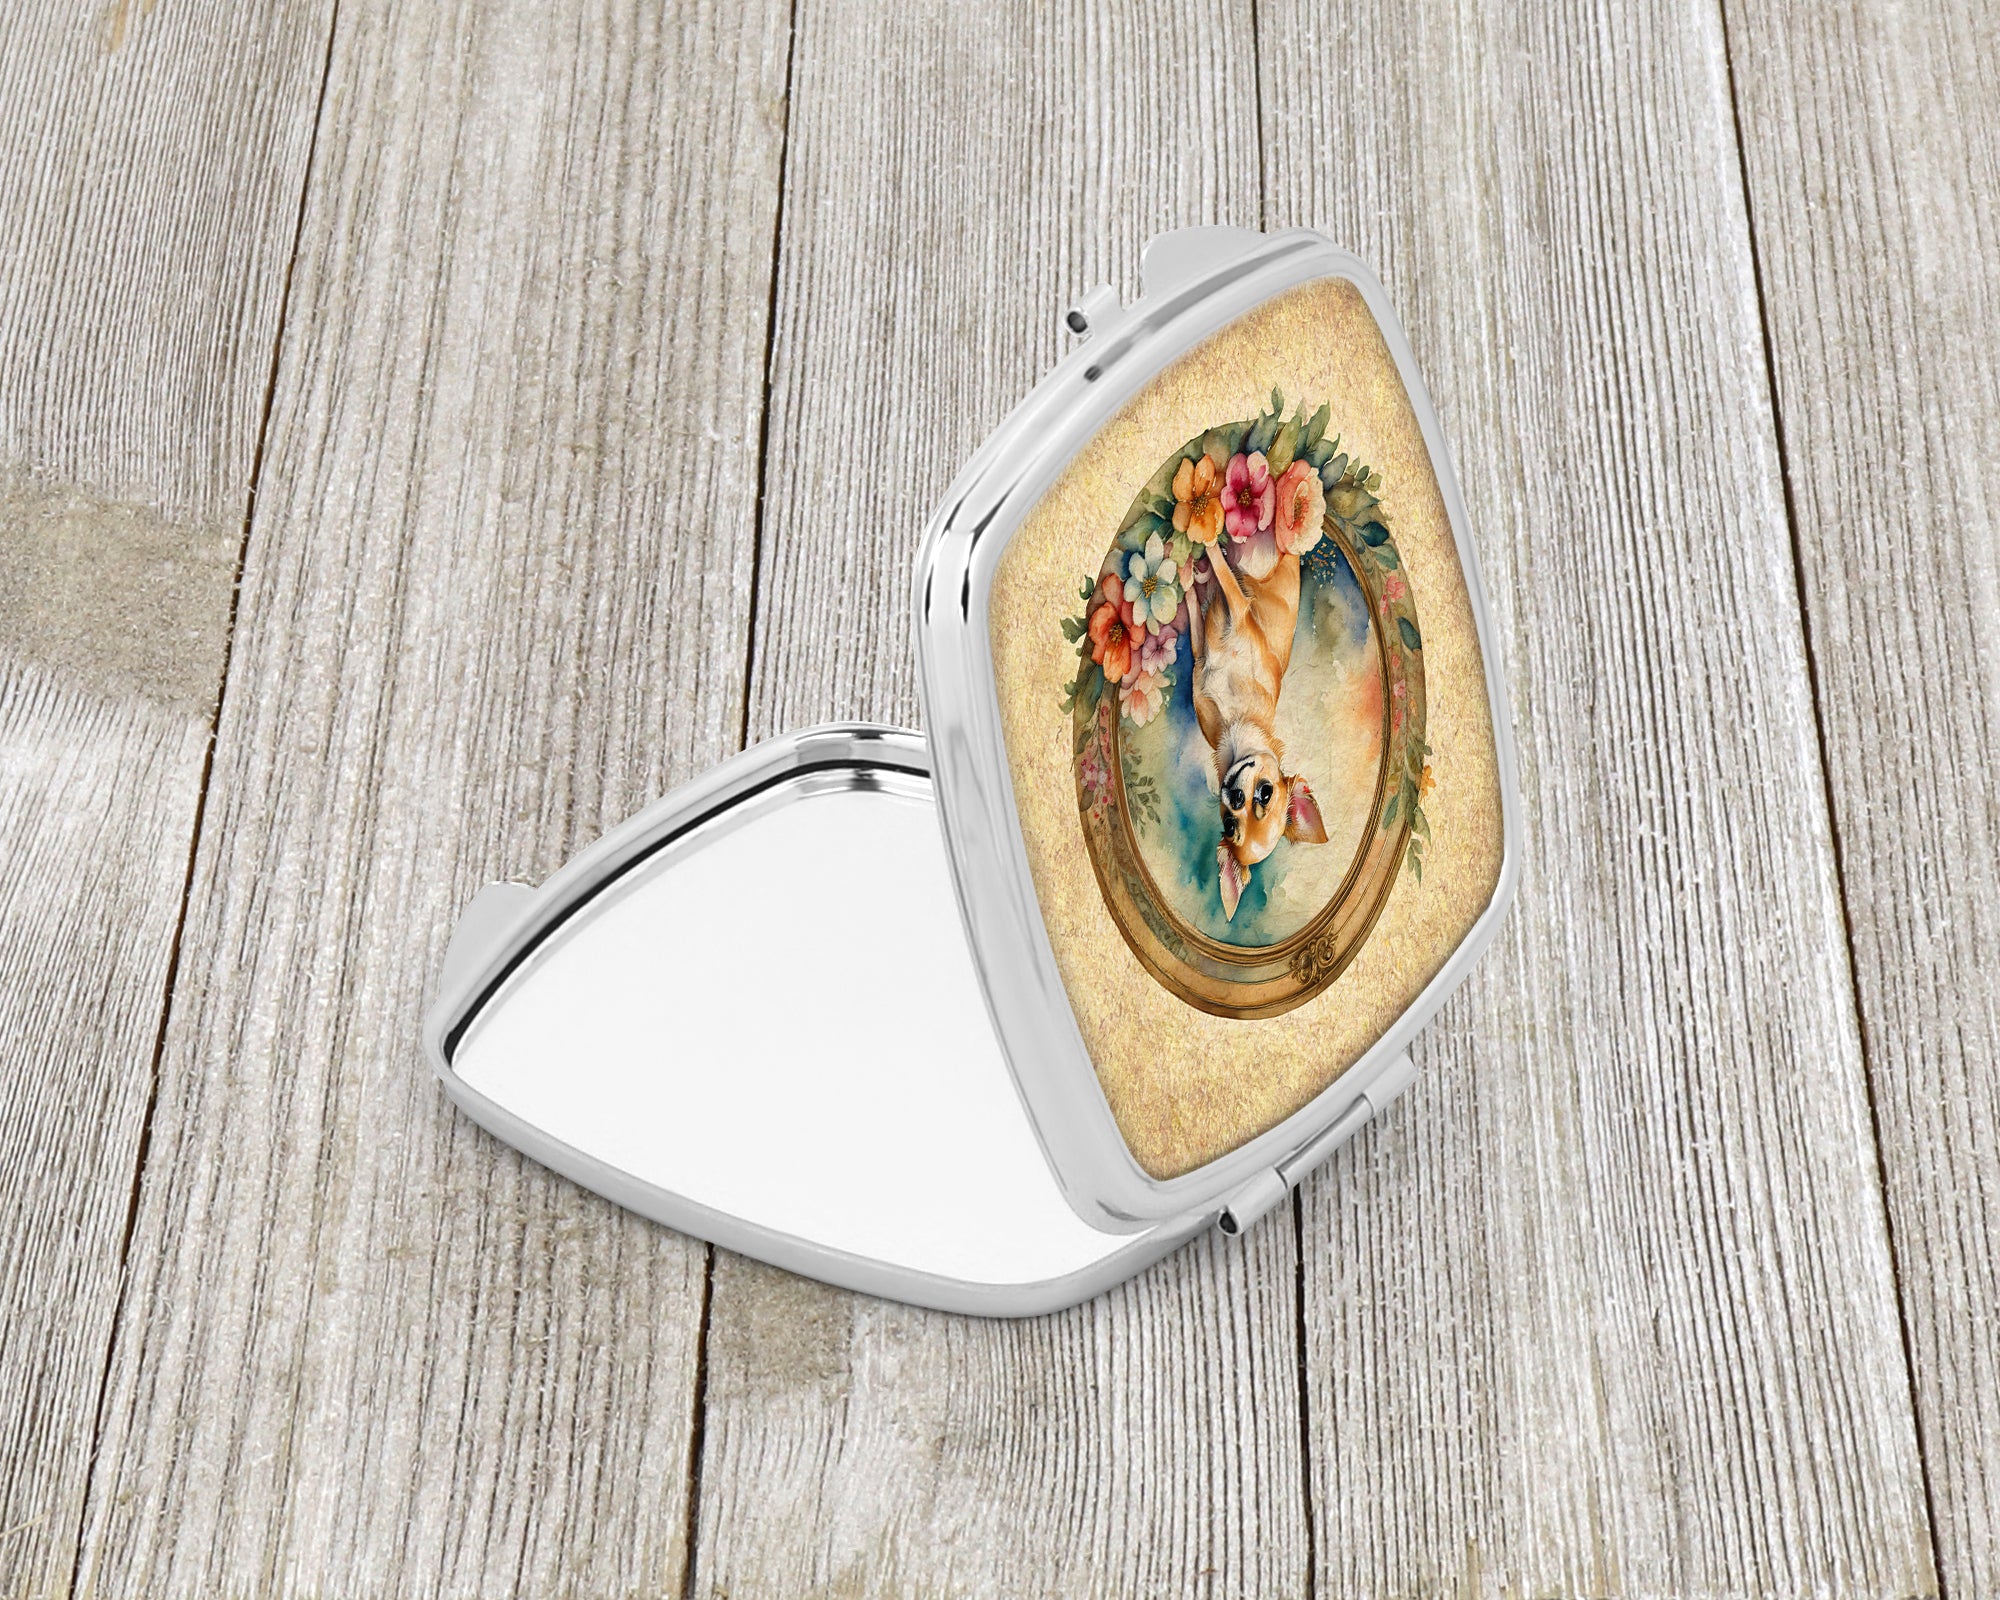 Buy this Chihuahua and Flowers Compact Mirror